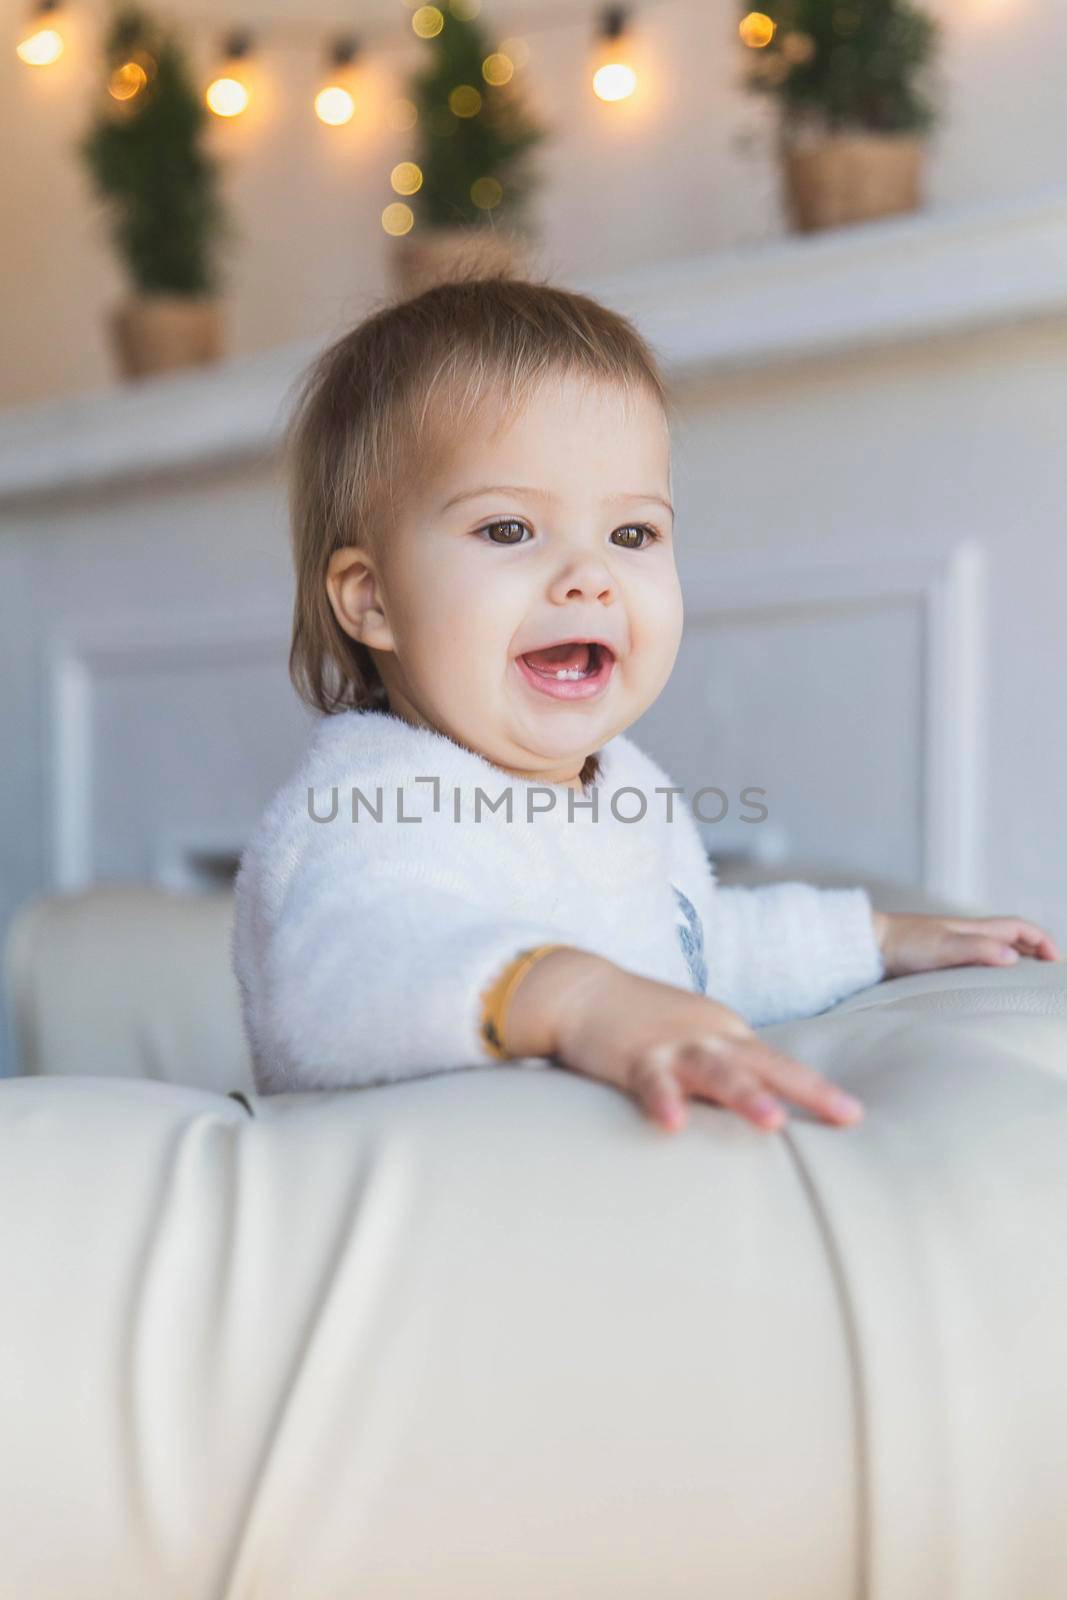 Baby on sofa near christmas tree is smiles so that two teeth are visible.